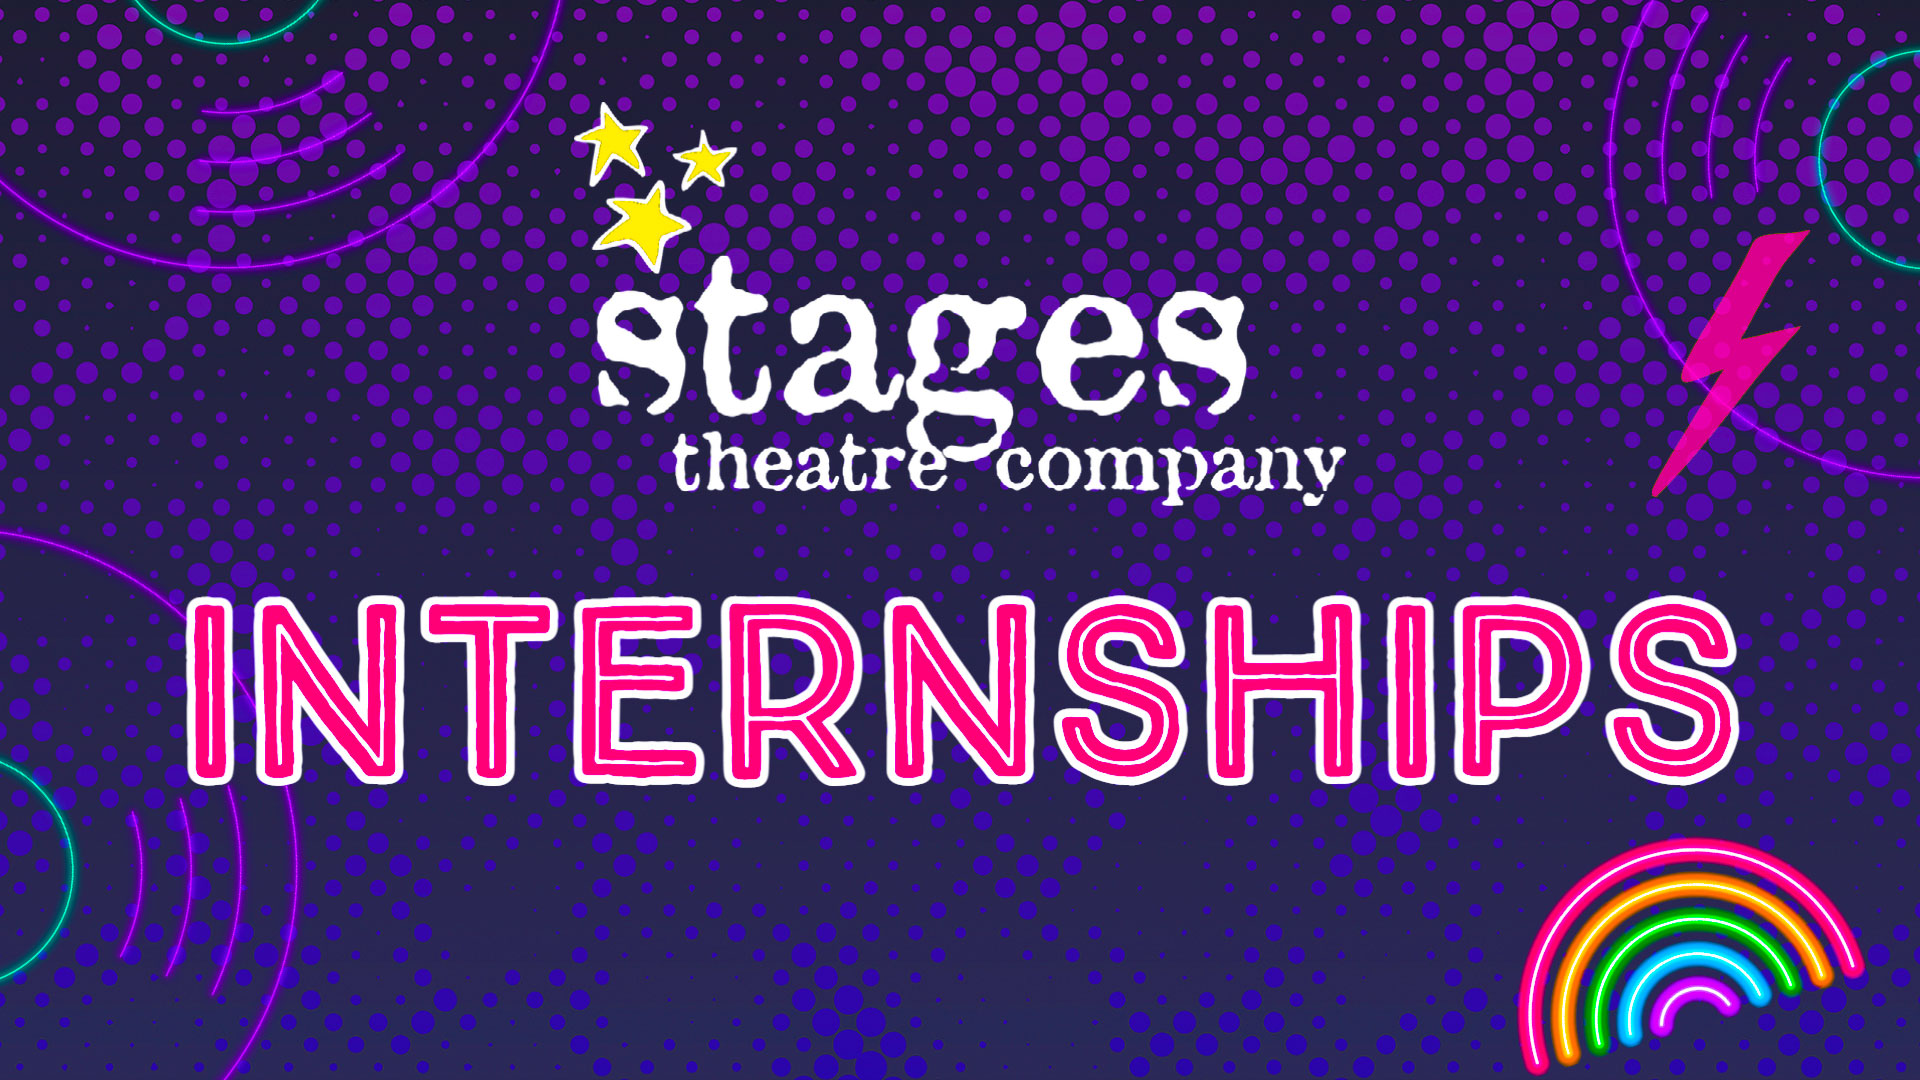 Internships at Stages Theatre Company